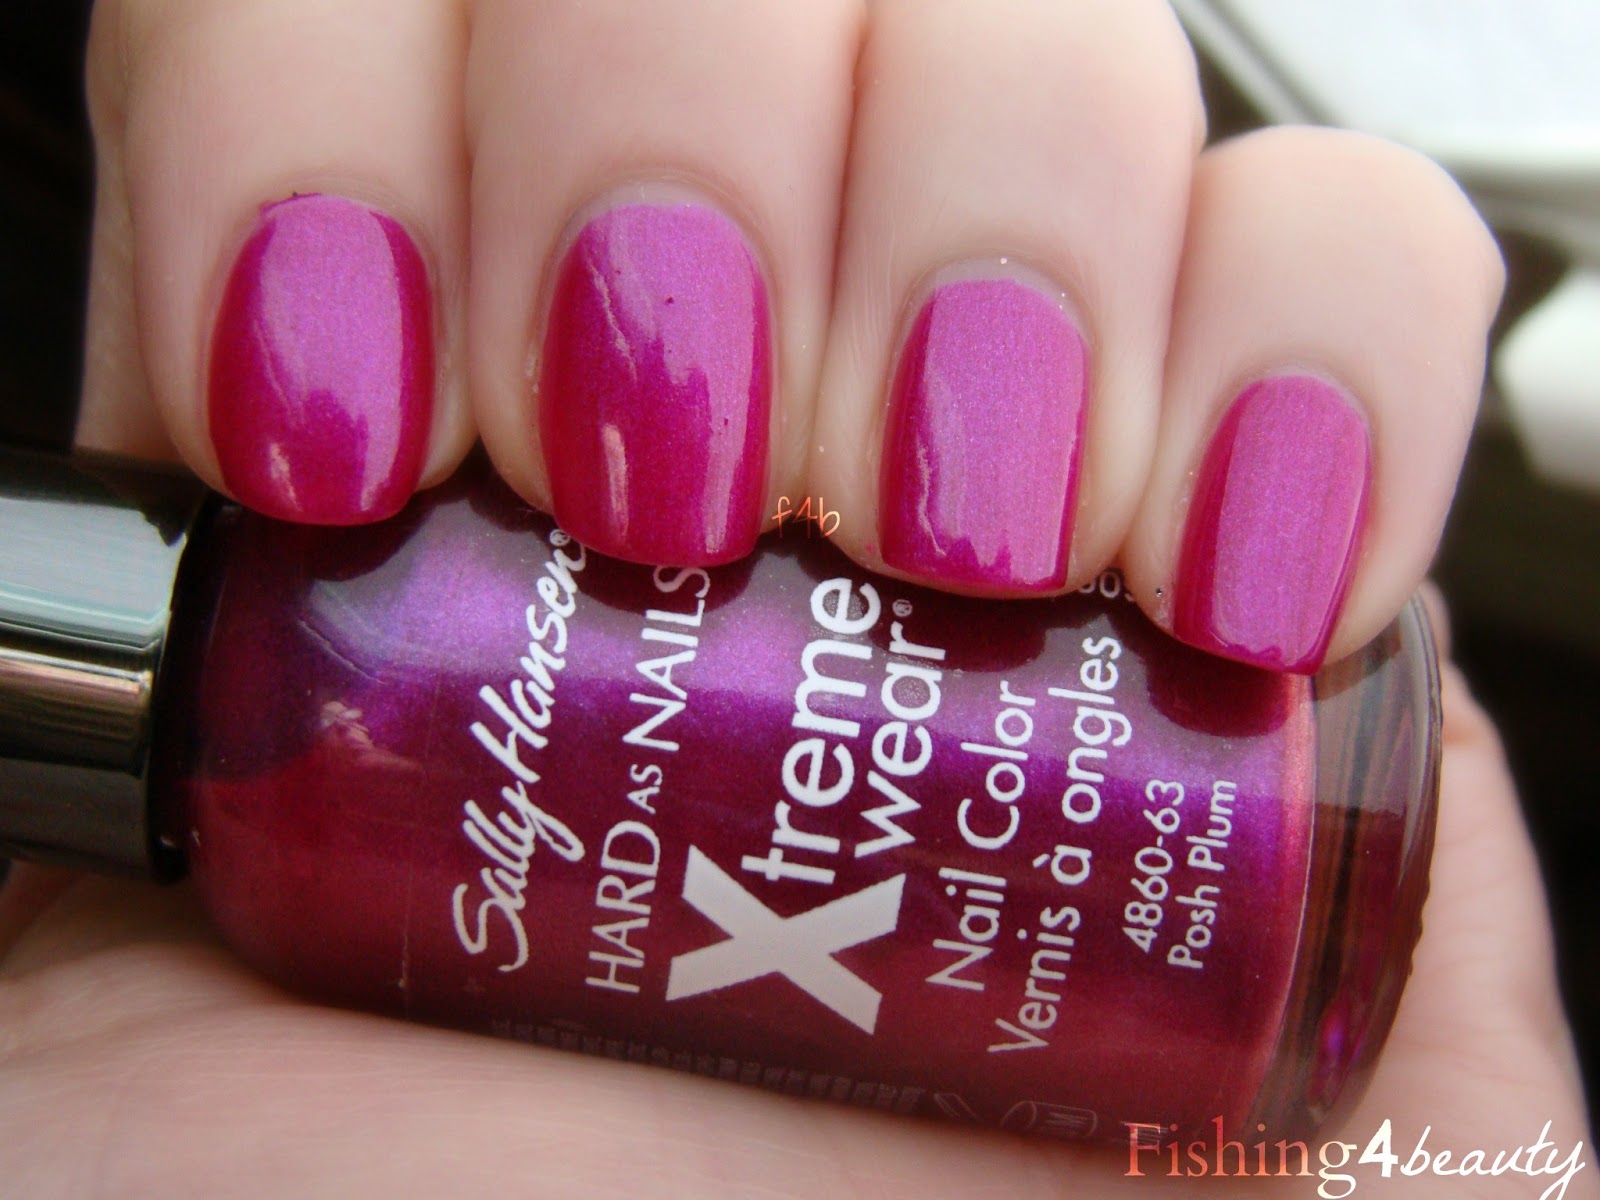 9. Sally Hansen Hard as Nails Xtreme Wear Nail Polish in "Feet on the Ground" - wide 6